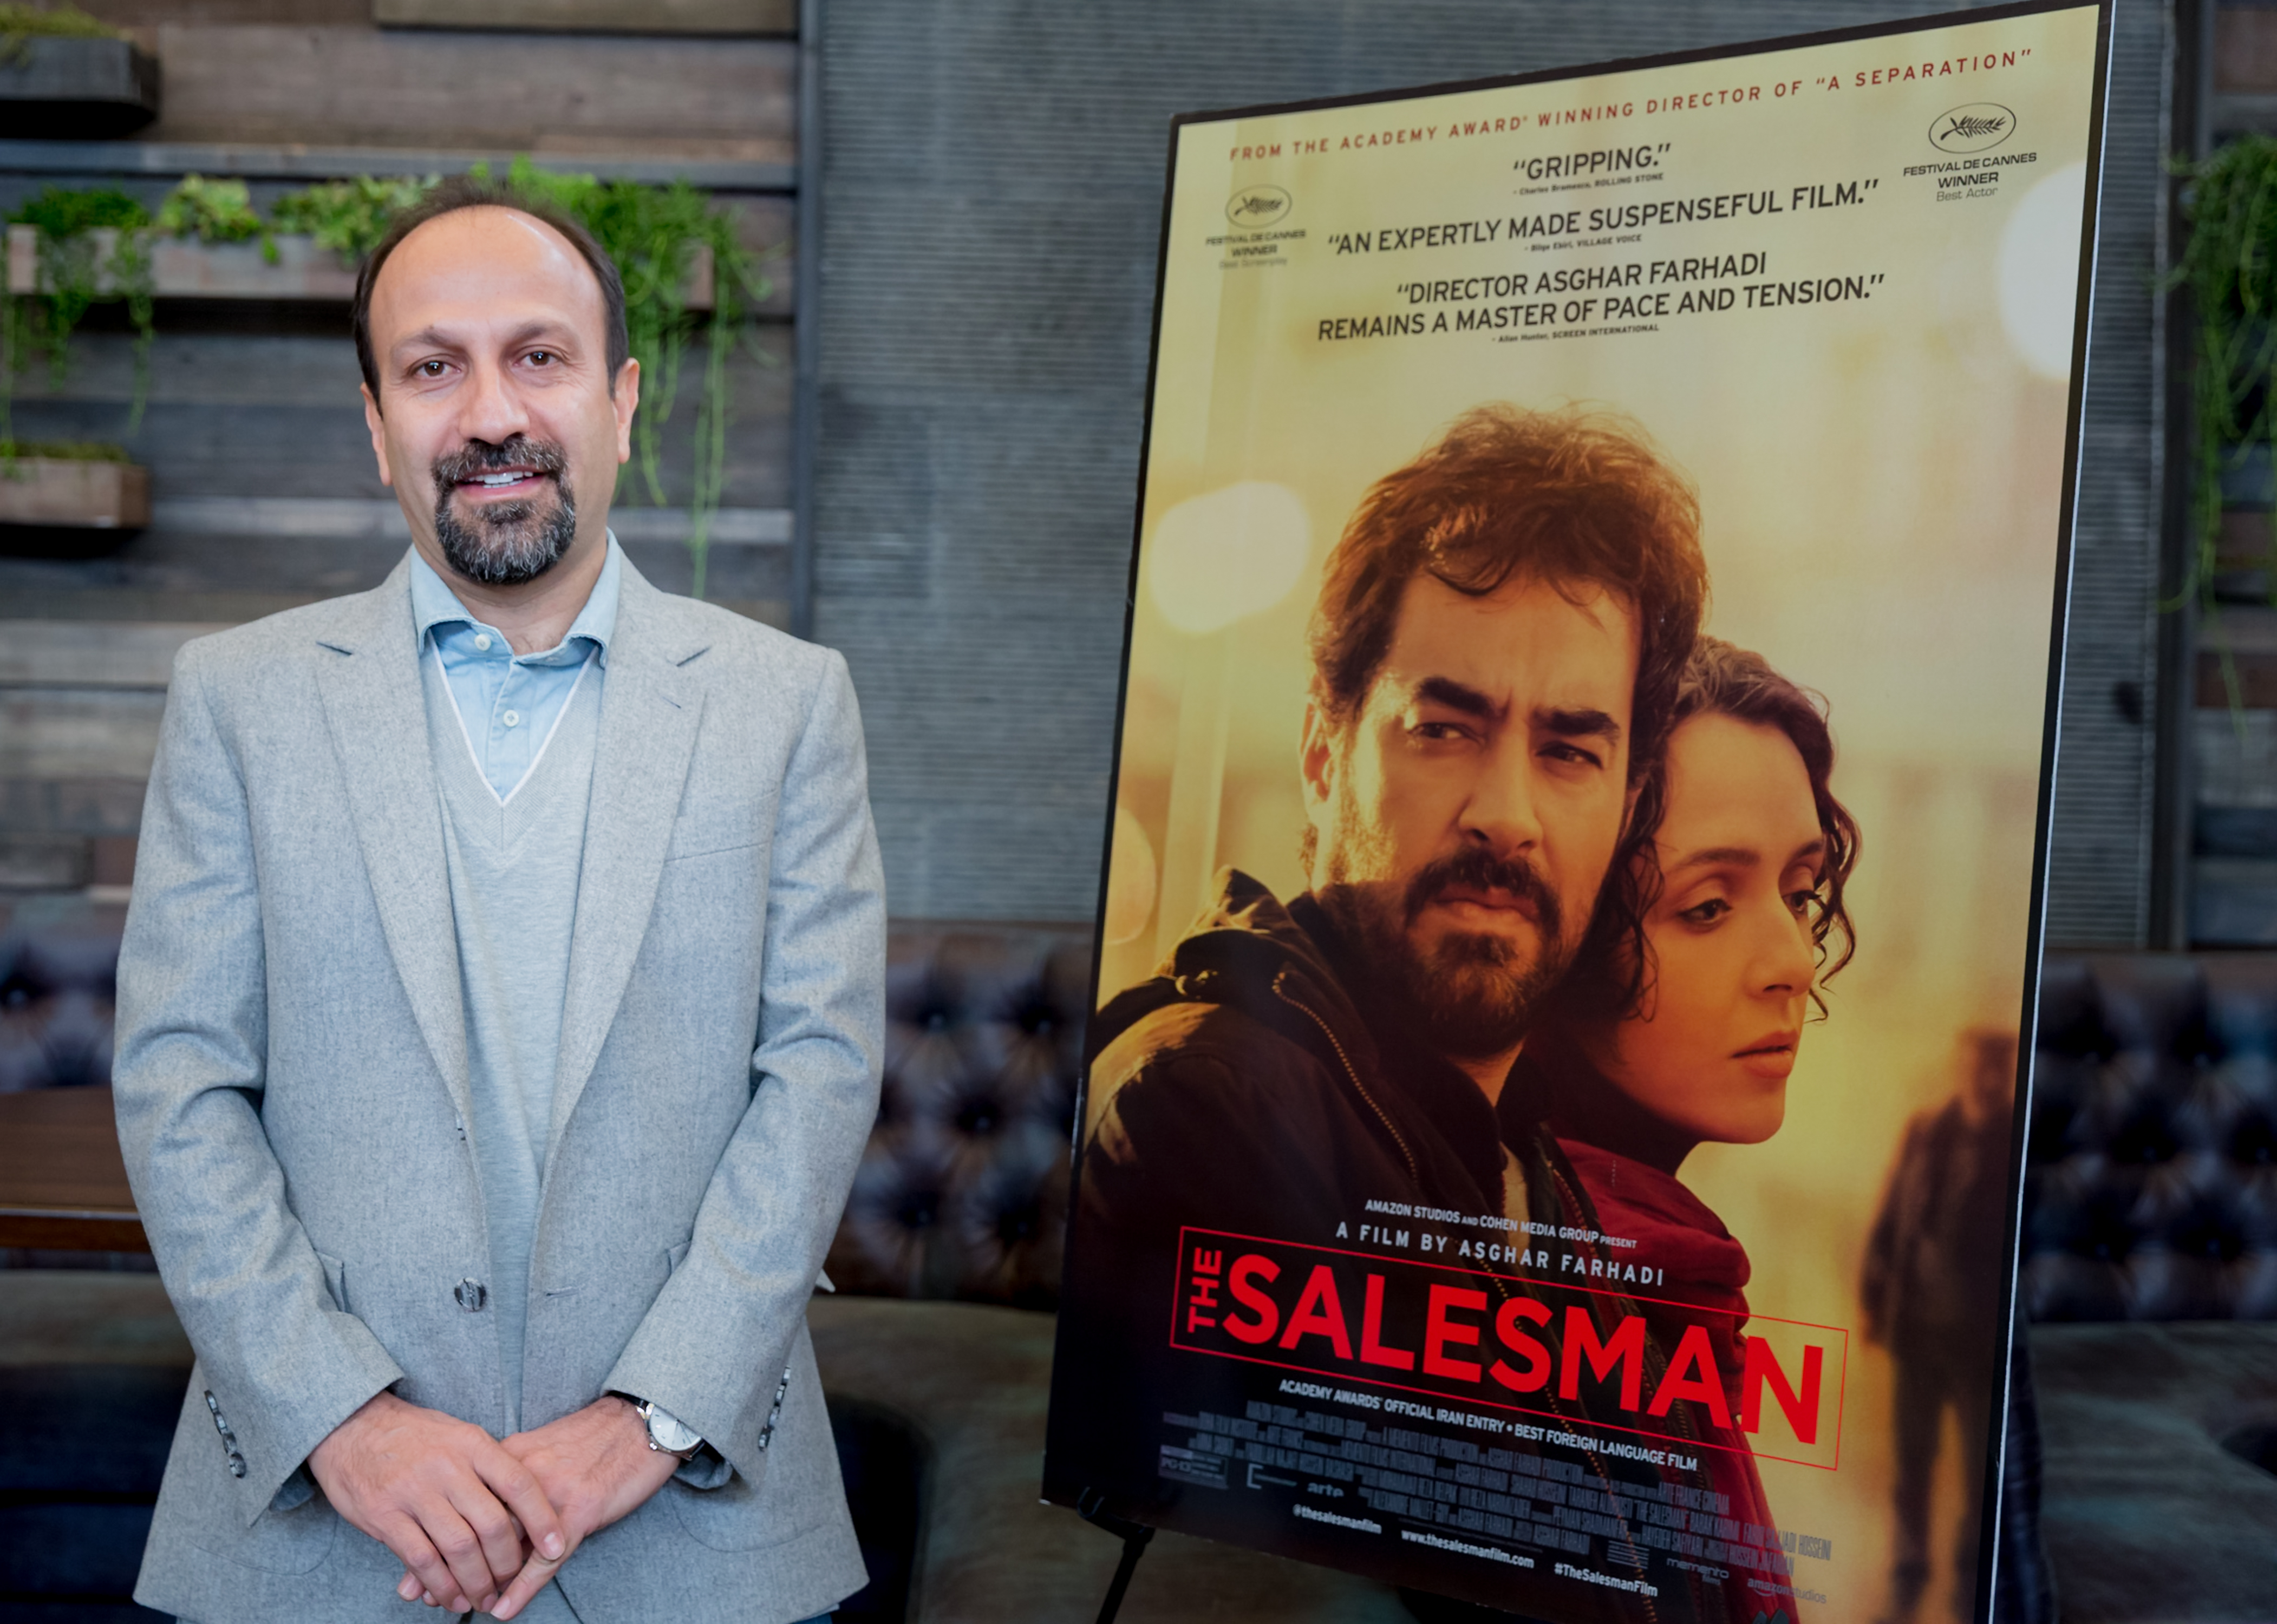 Director Asghar Farhadi poses for a picture at the Egyptian Theatre on January 7, 2017 in Hollywood, California. (Greg Doherty—Getty Images)